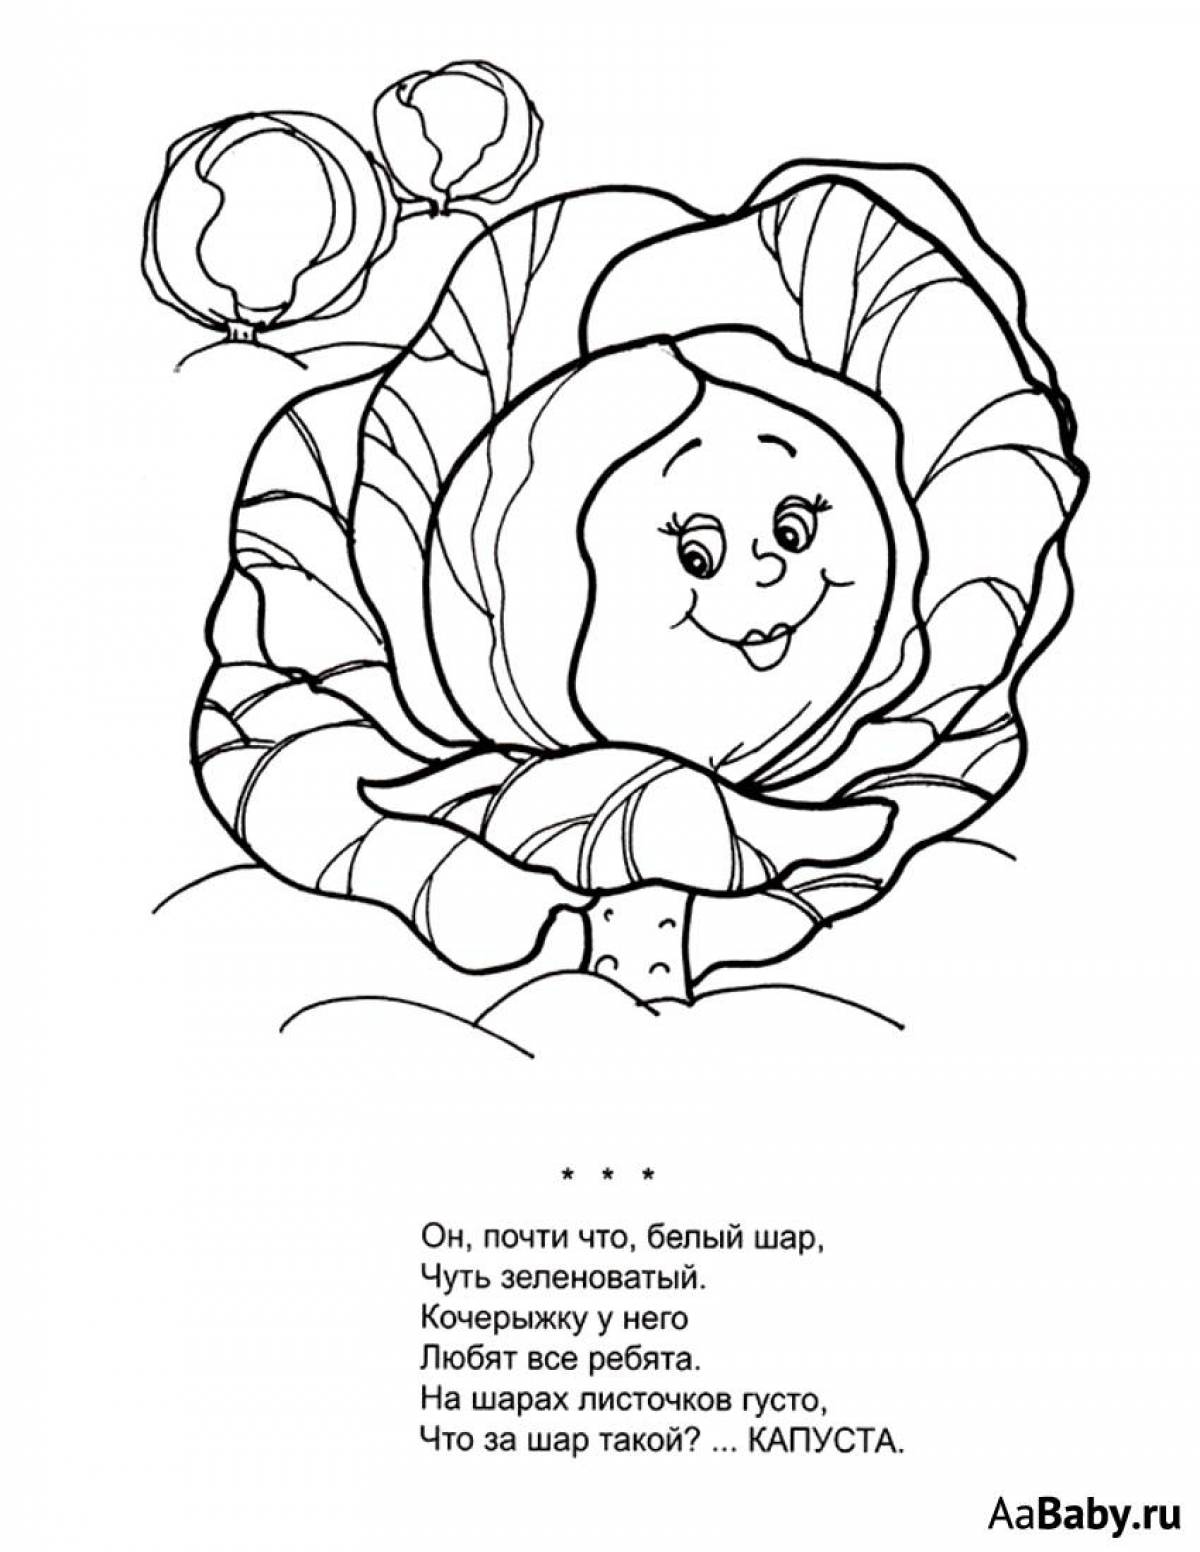 Cabbage coloring book for kids